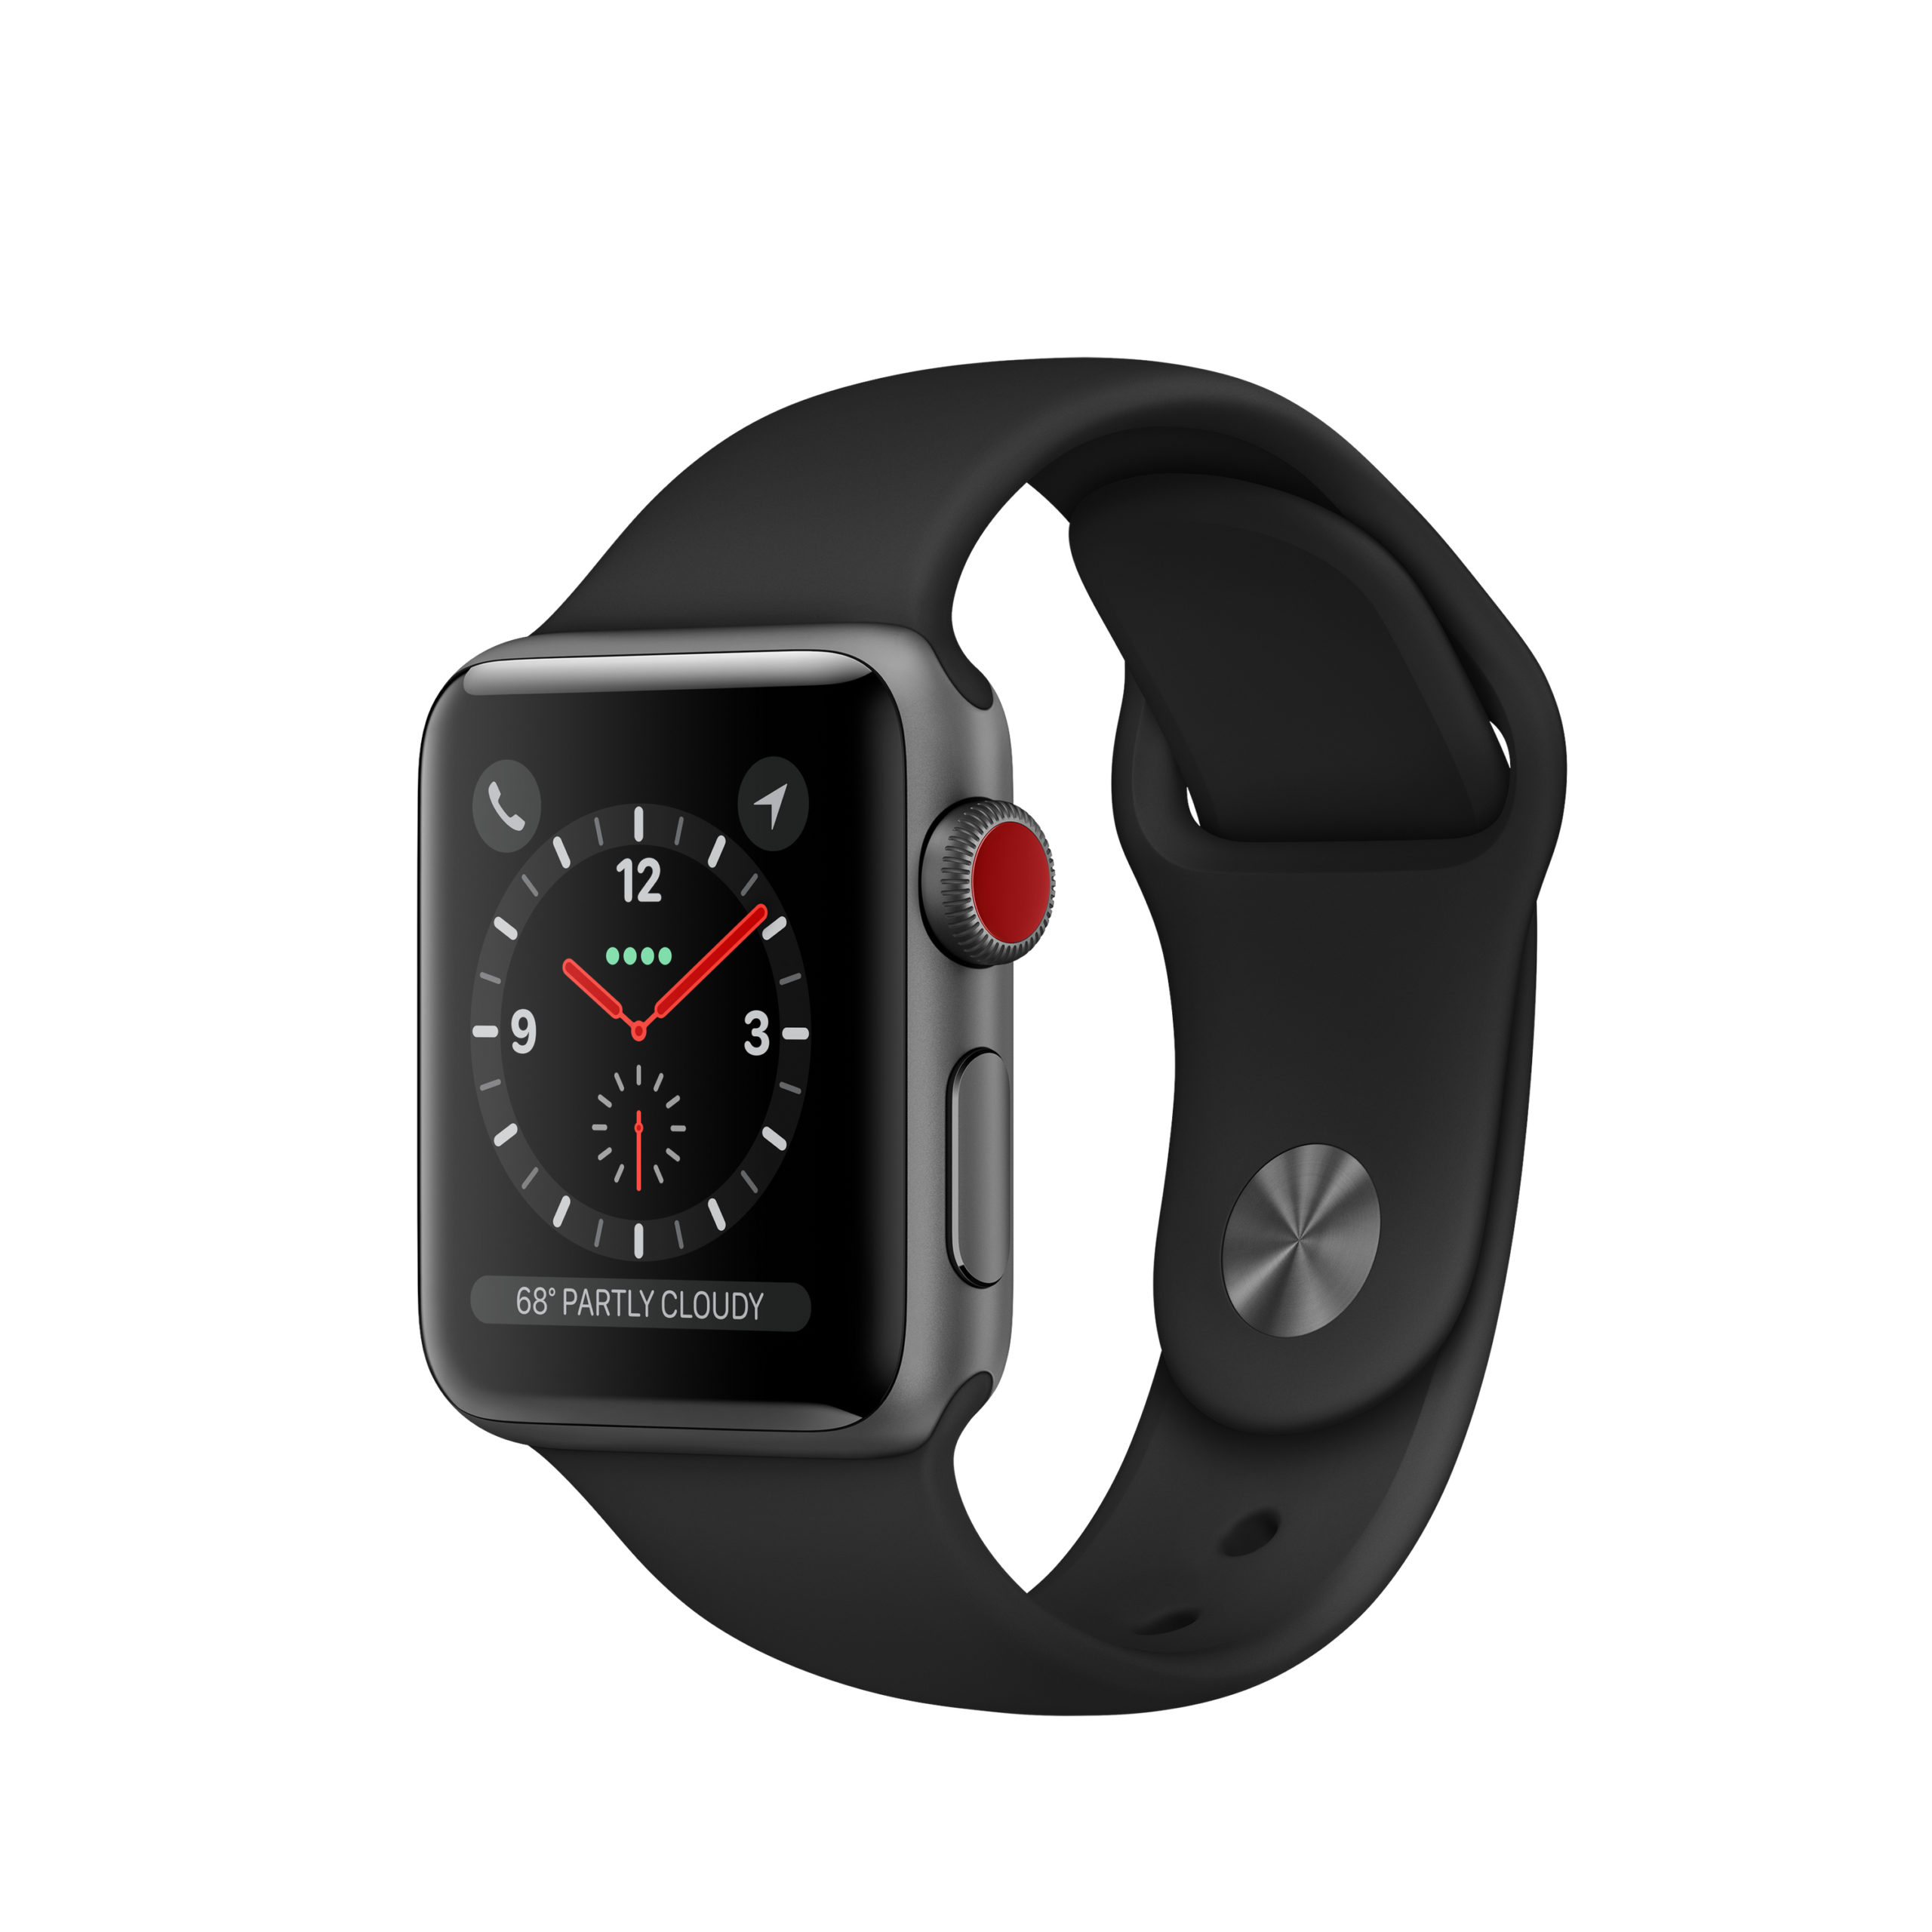 MTGH2LL/A - $180 - Apple Watch Series 3 (GPS + Cell) 38mm Space Gray